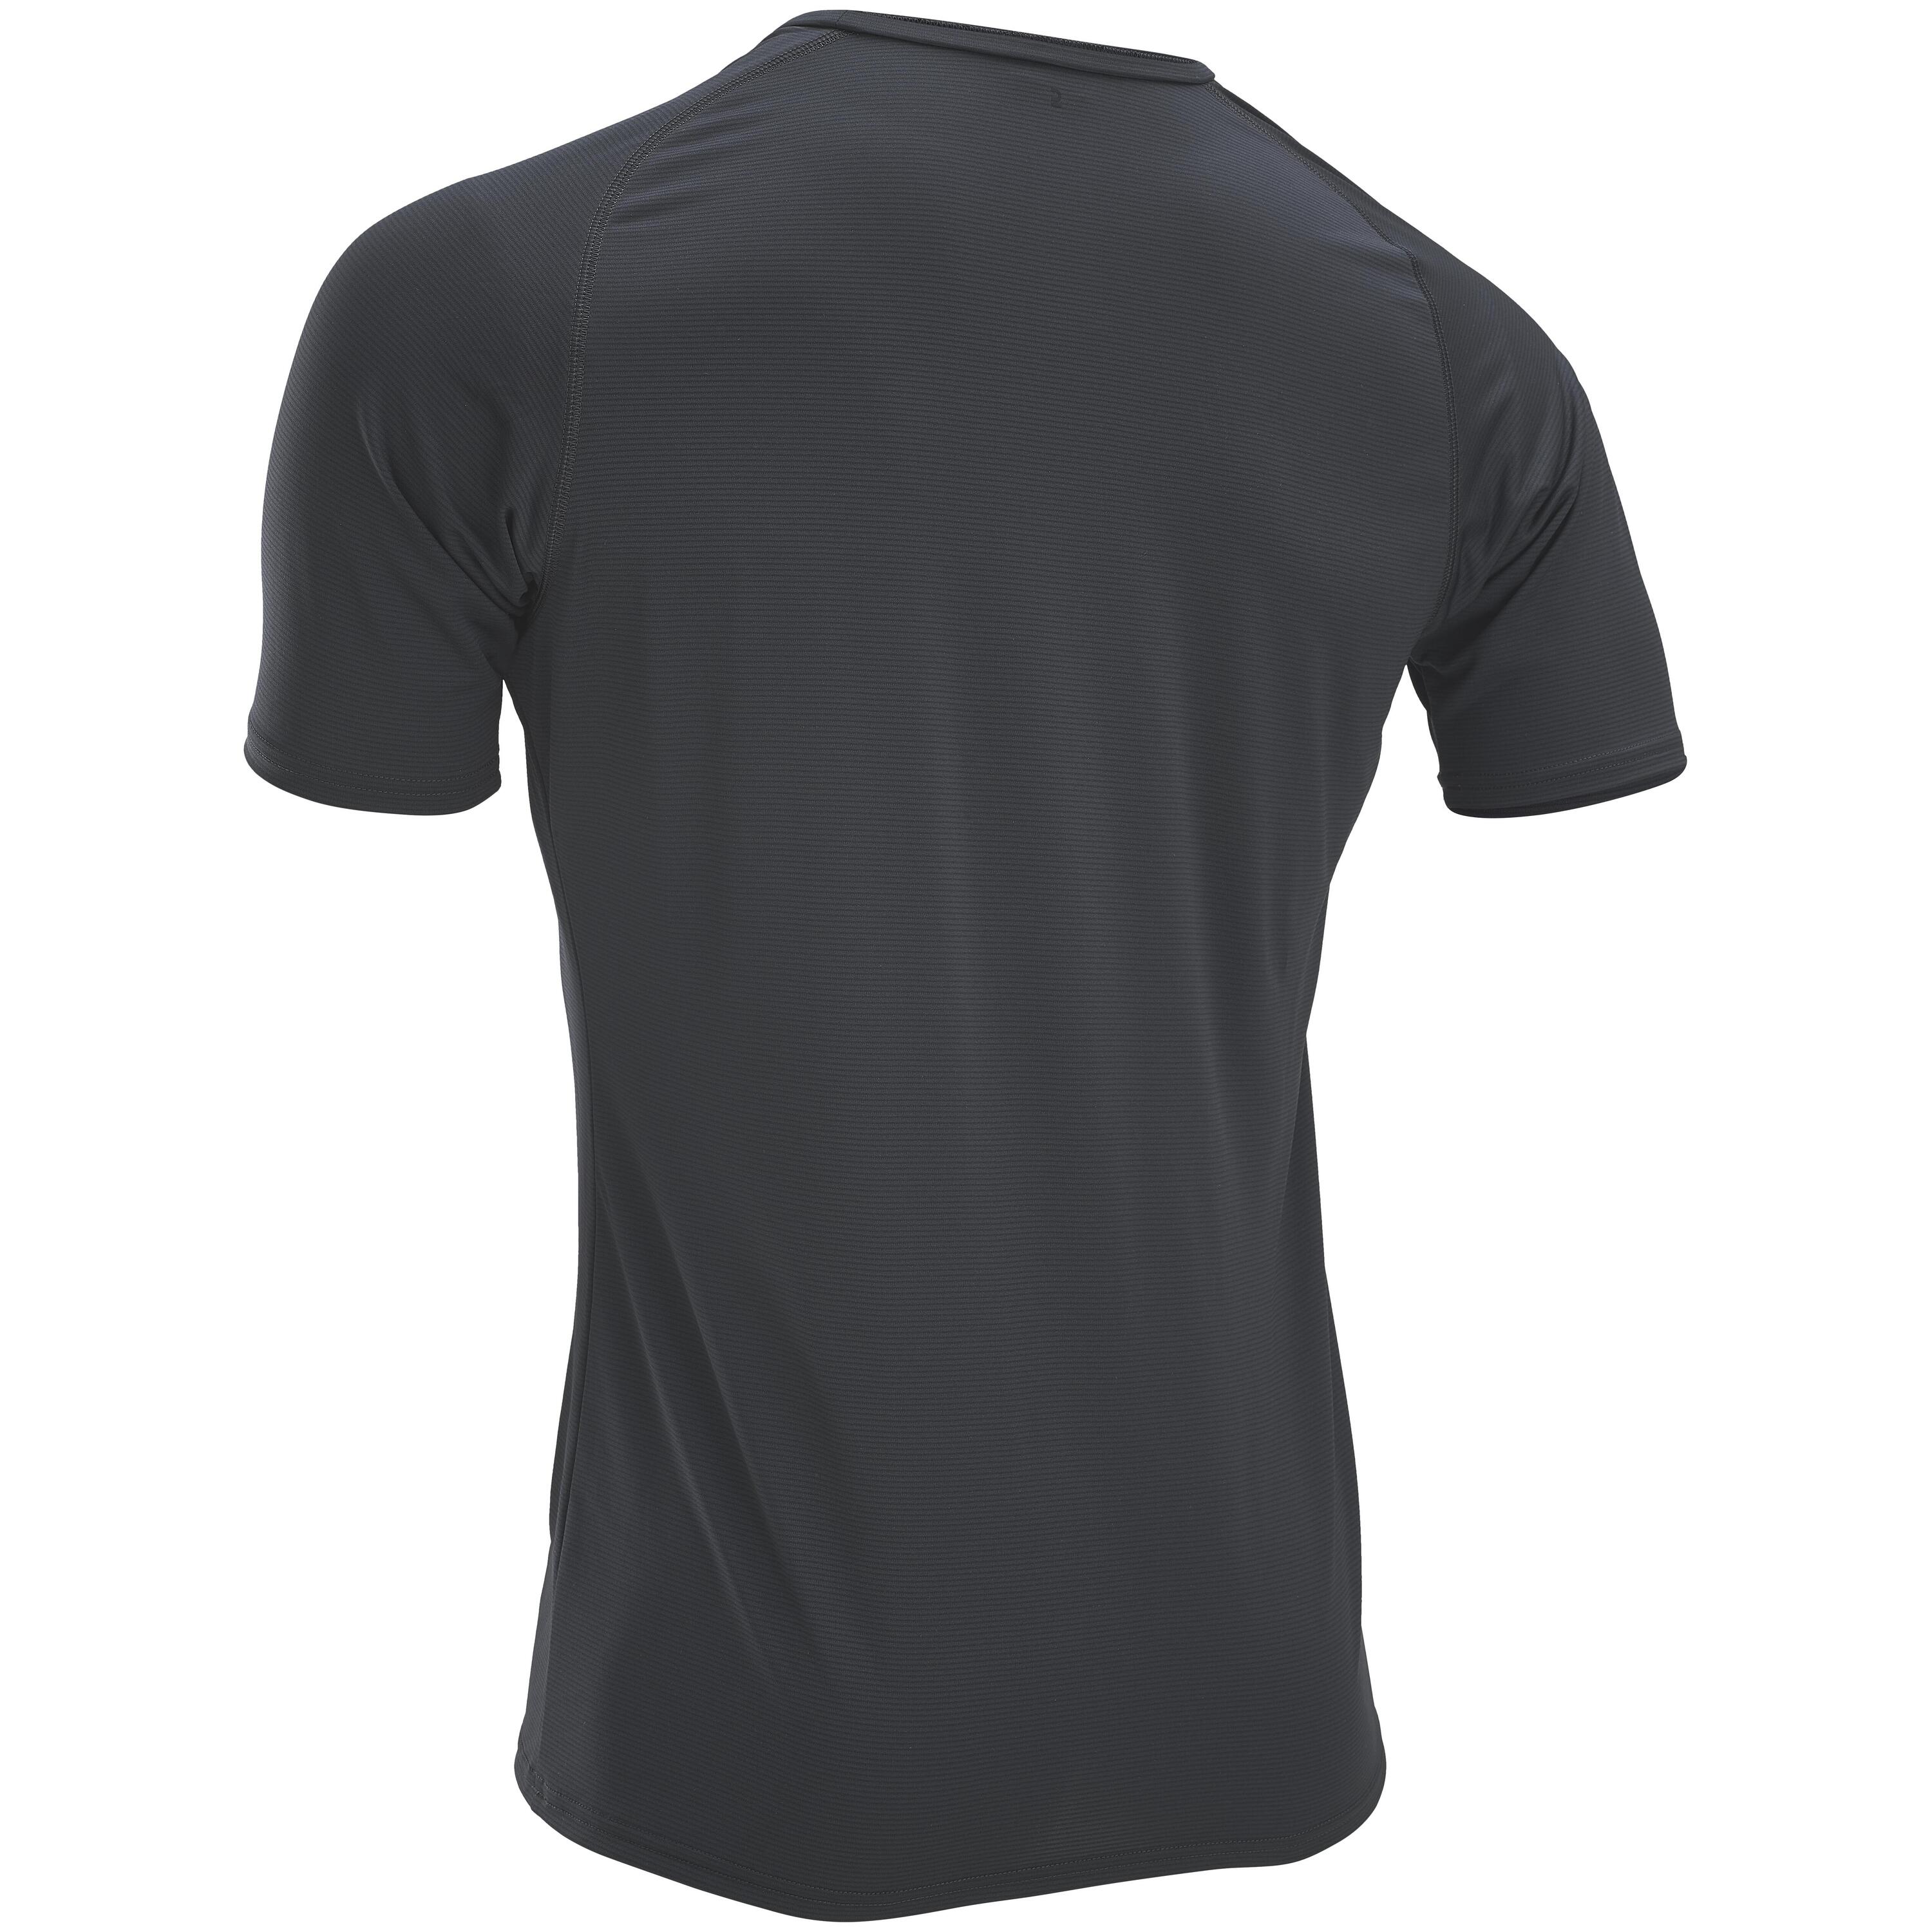 Essential Cycling Base Layer - Black 2/3